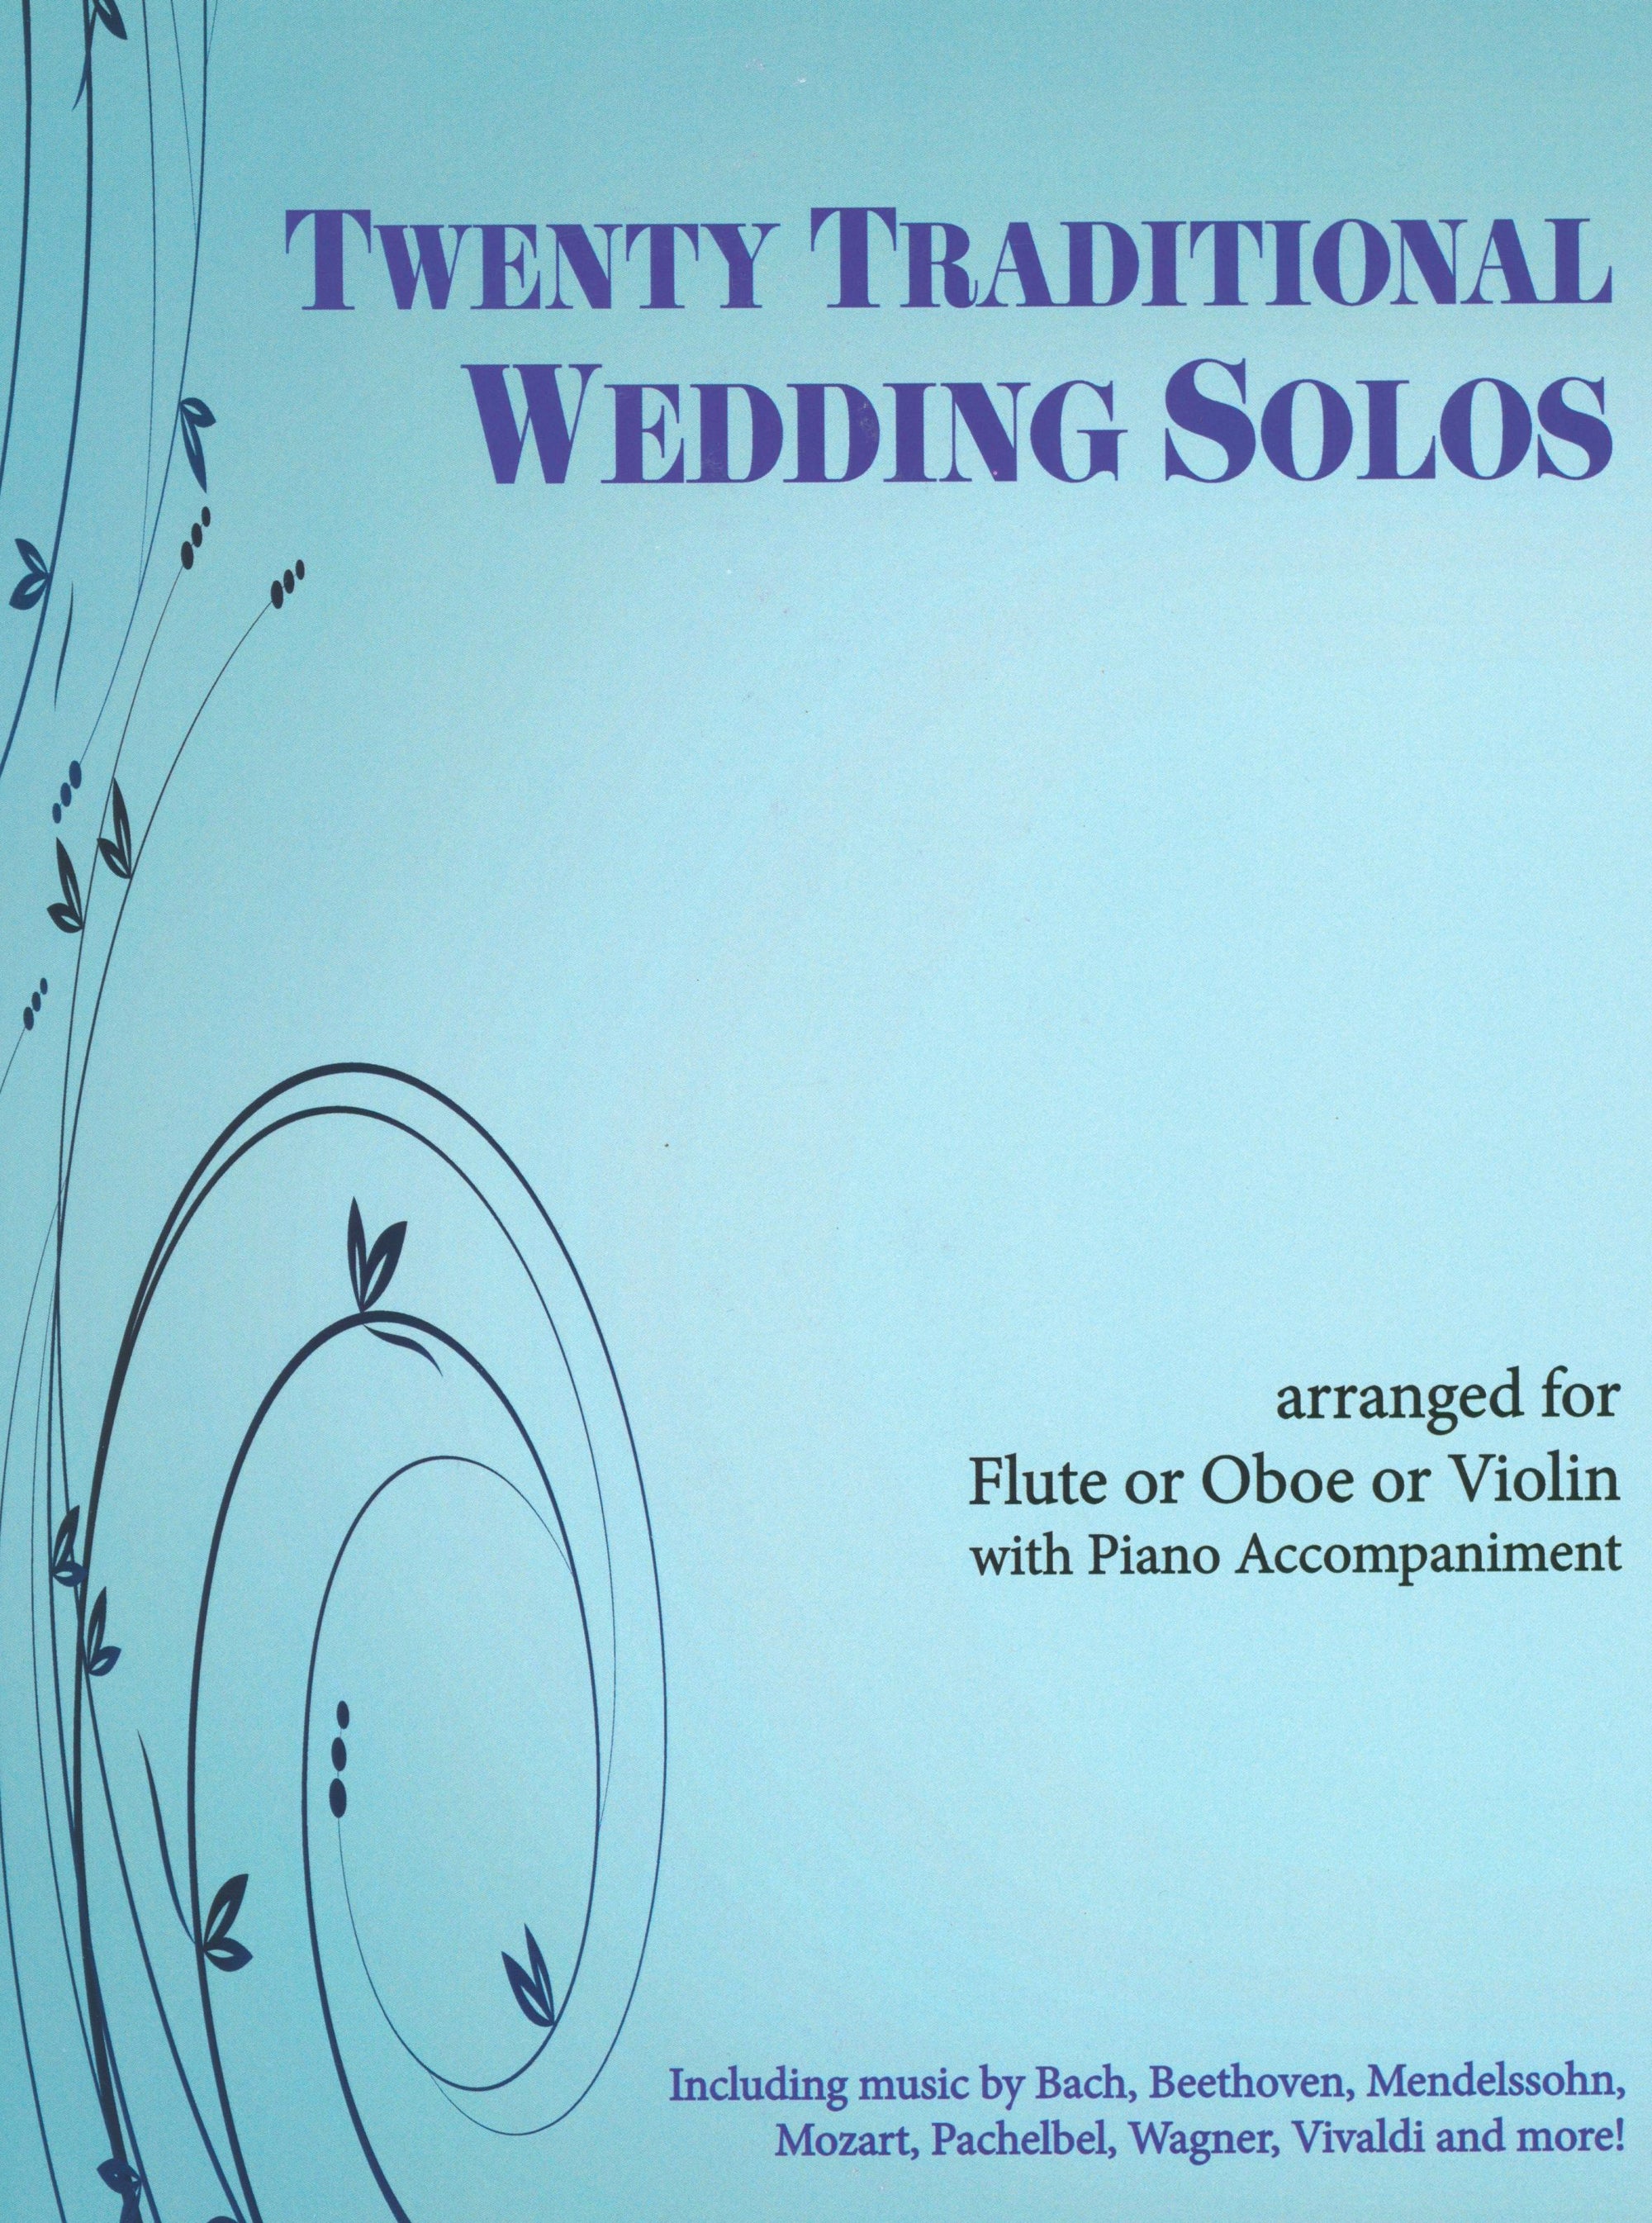 20 Traditional Wedding Solos (arr. for violin, flute, or oboe with piano)